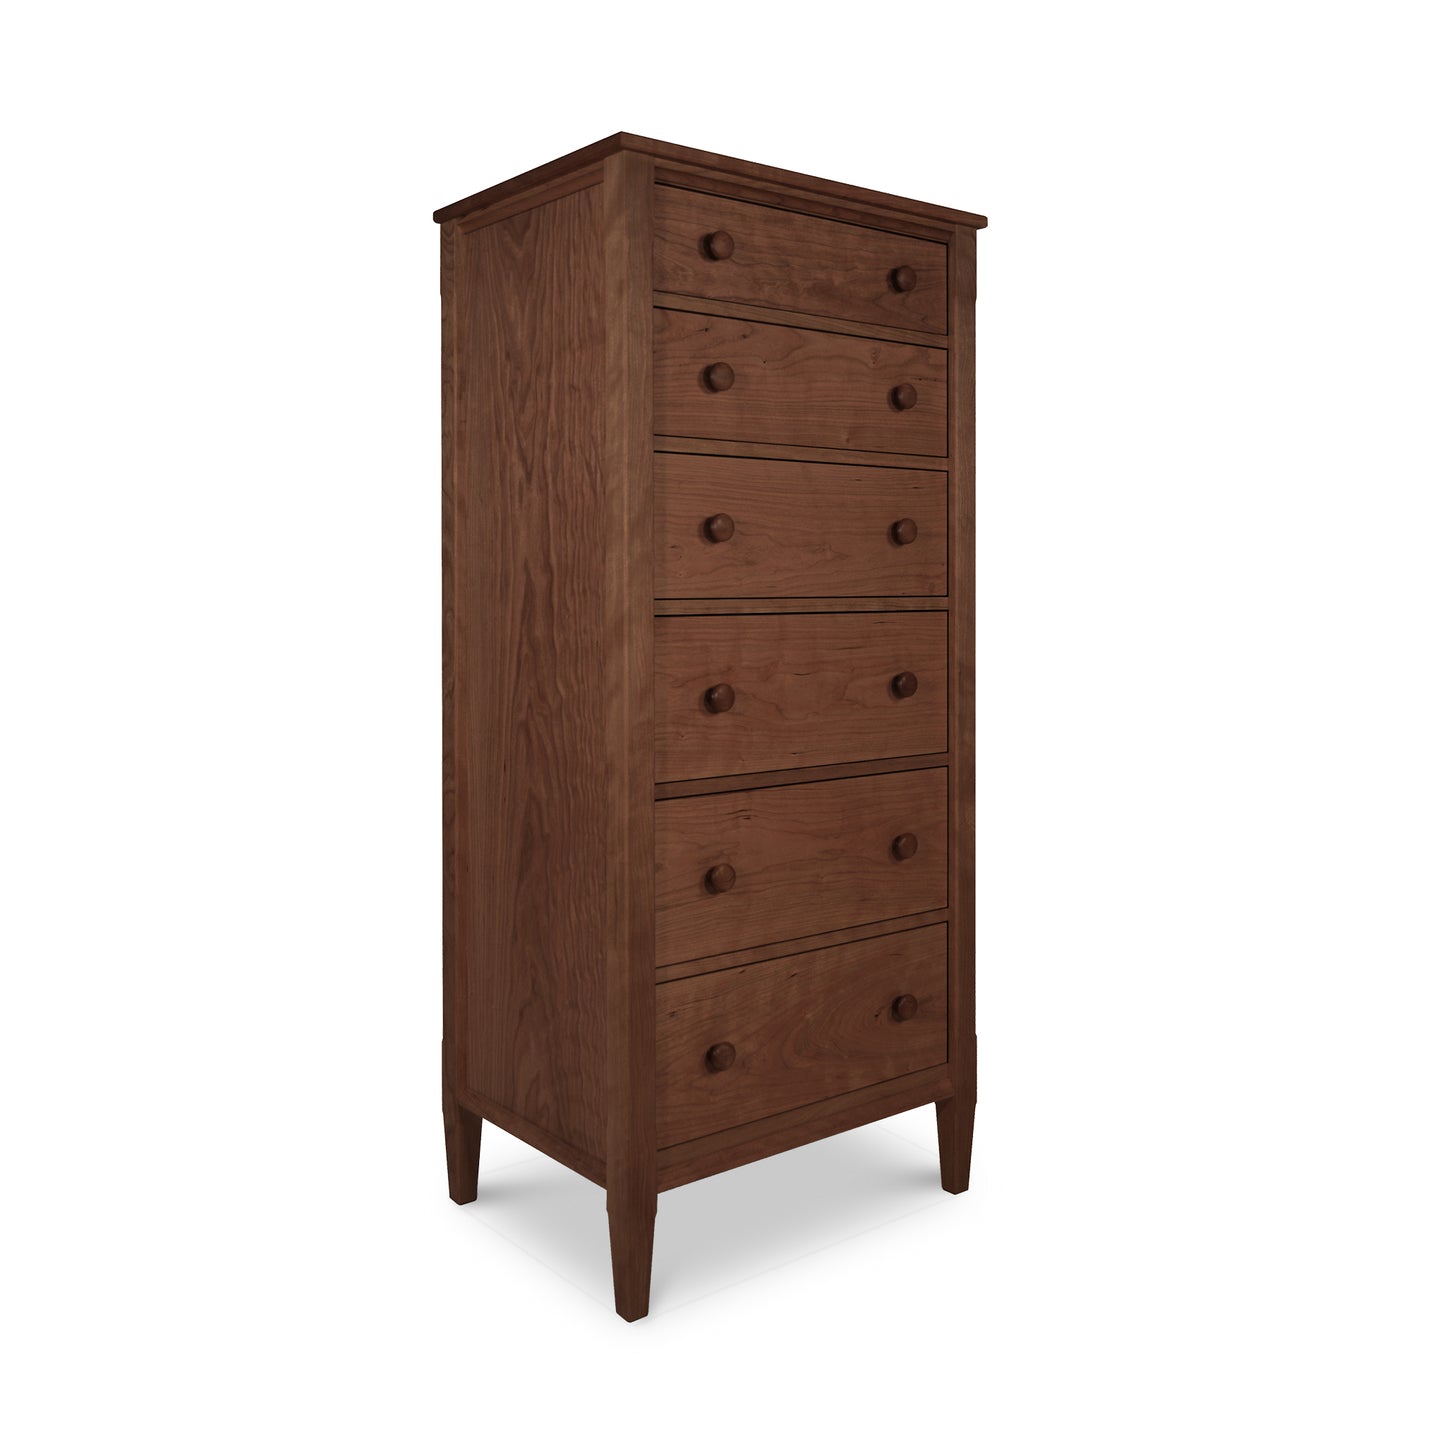 A tall, vertical dresser with six drawers from the Maple Corner Woodworks Vermont Shaker Lingerie Chest, standing on four slim legs, isolated on a white background. The dresser is made of dark brown solid